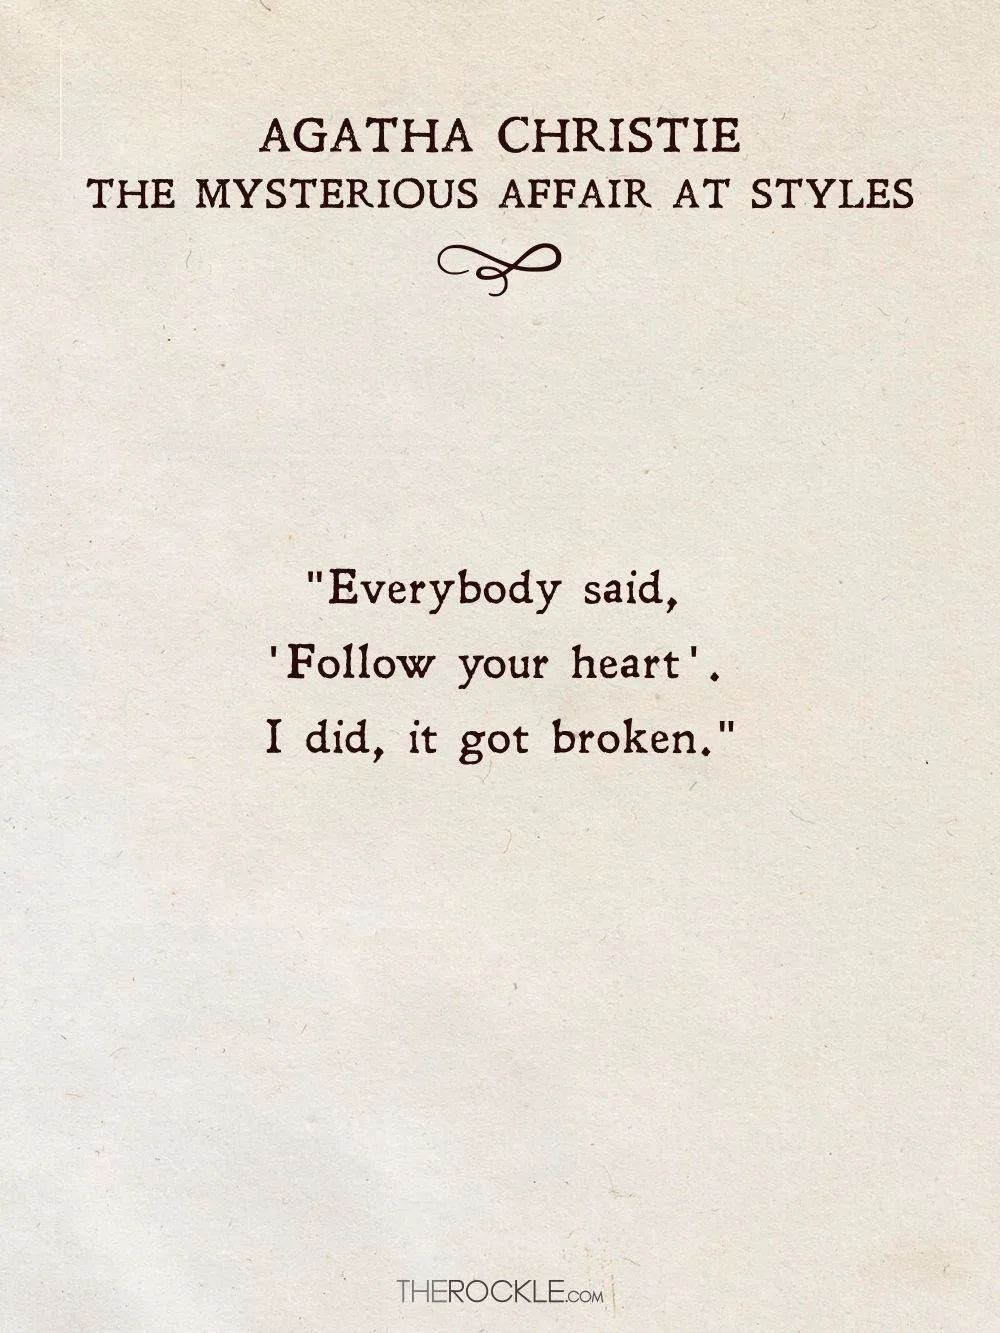 “Everybody said, “Follow your heart”. I did, it got broken.” ― Agatha Christie, The Mysterious Affair At Styles